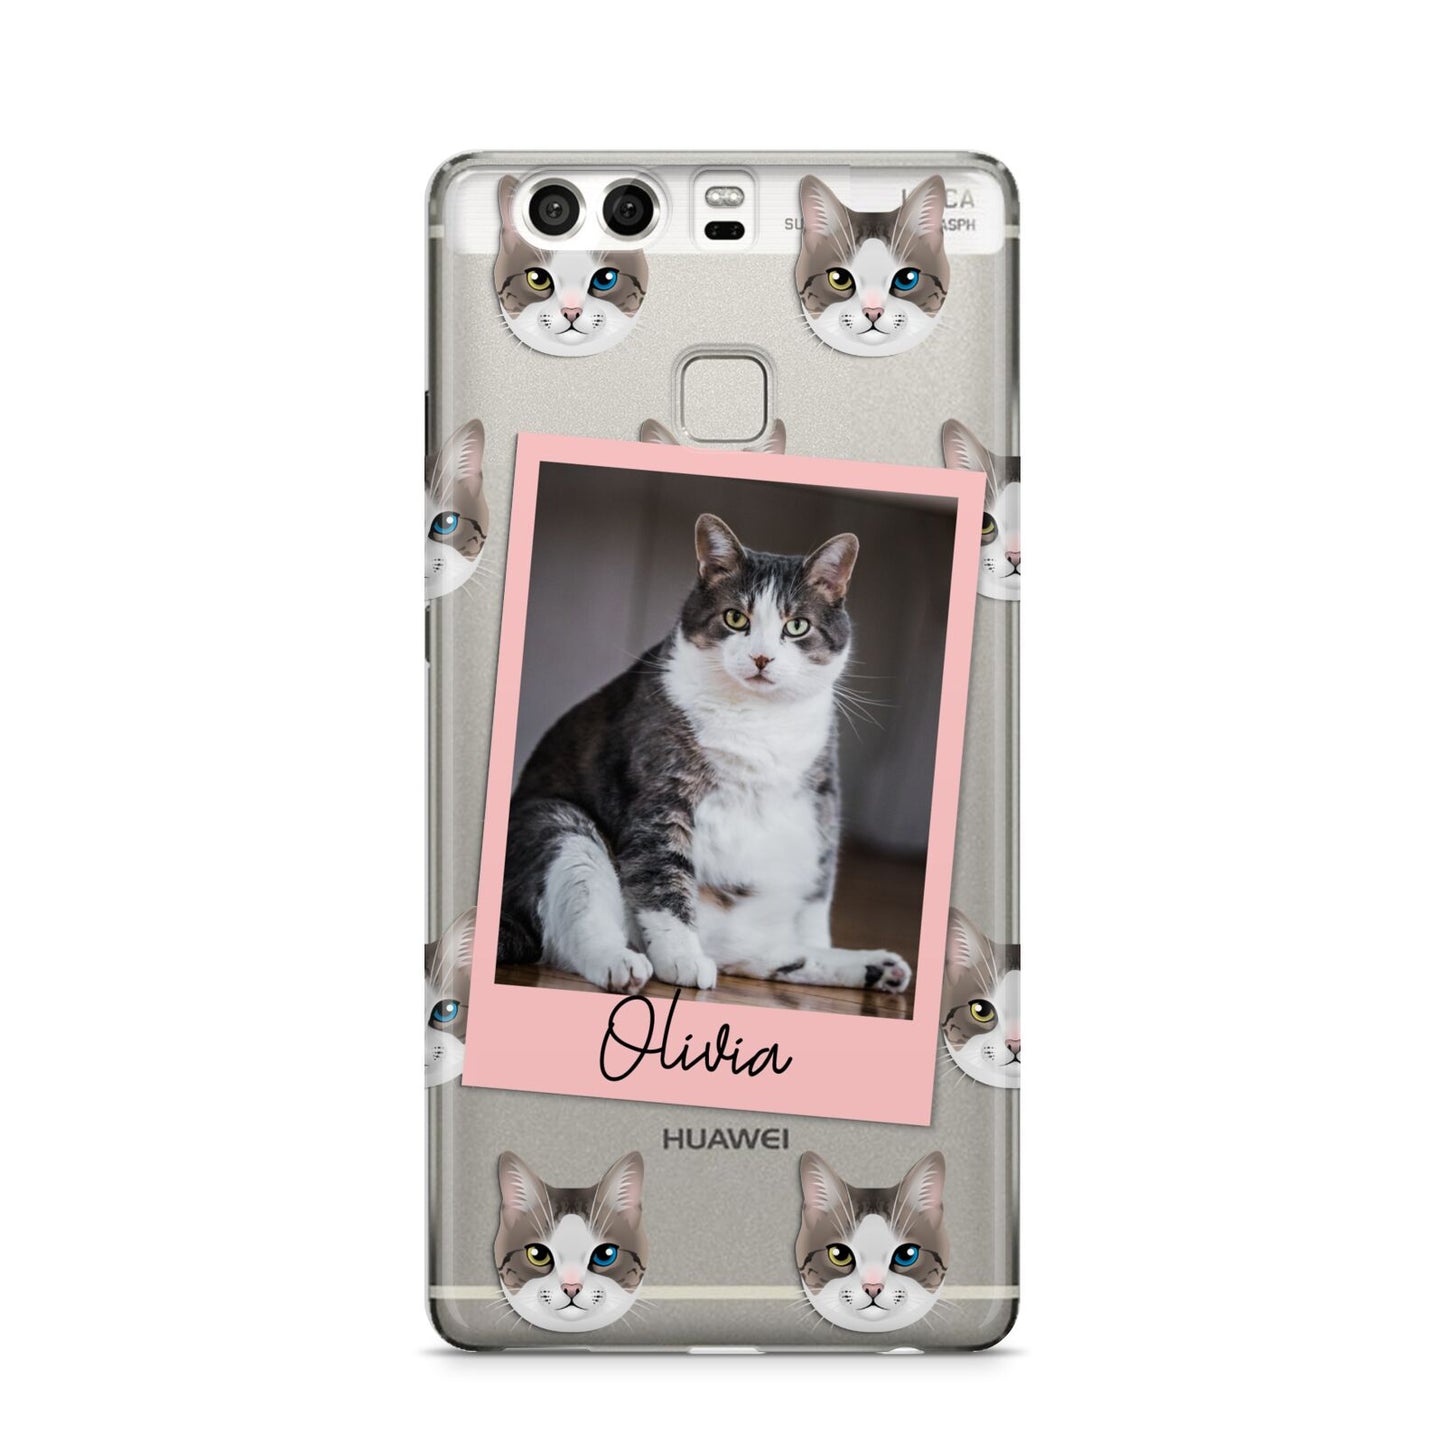 Personalised Cat Photo Huawei P9 Case